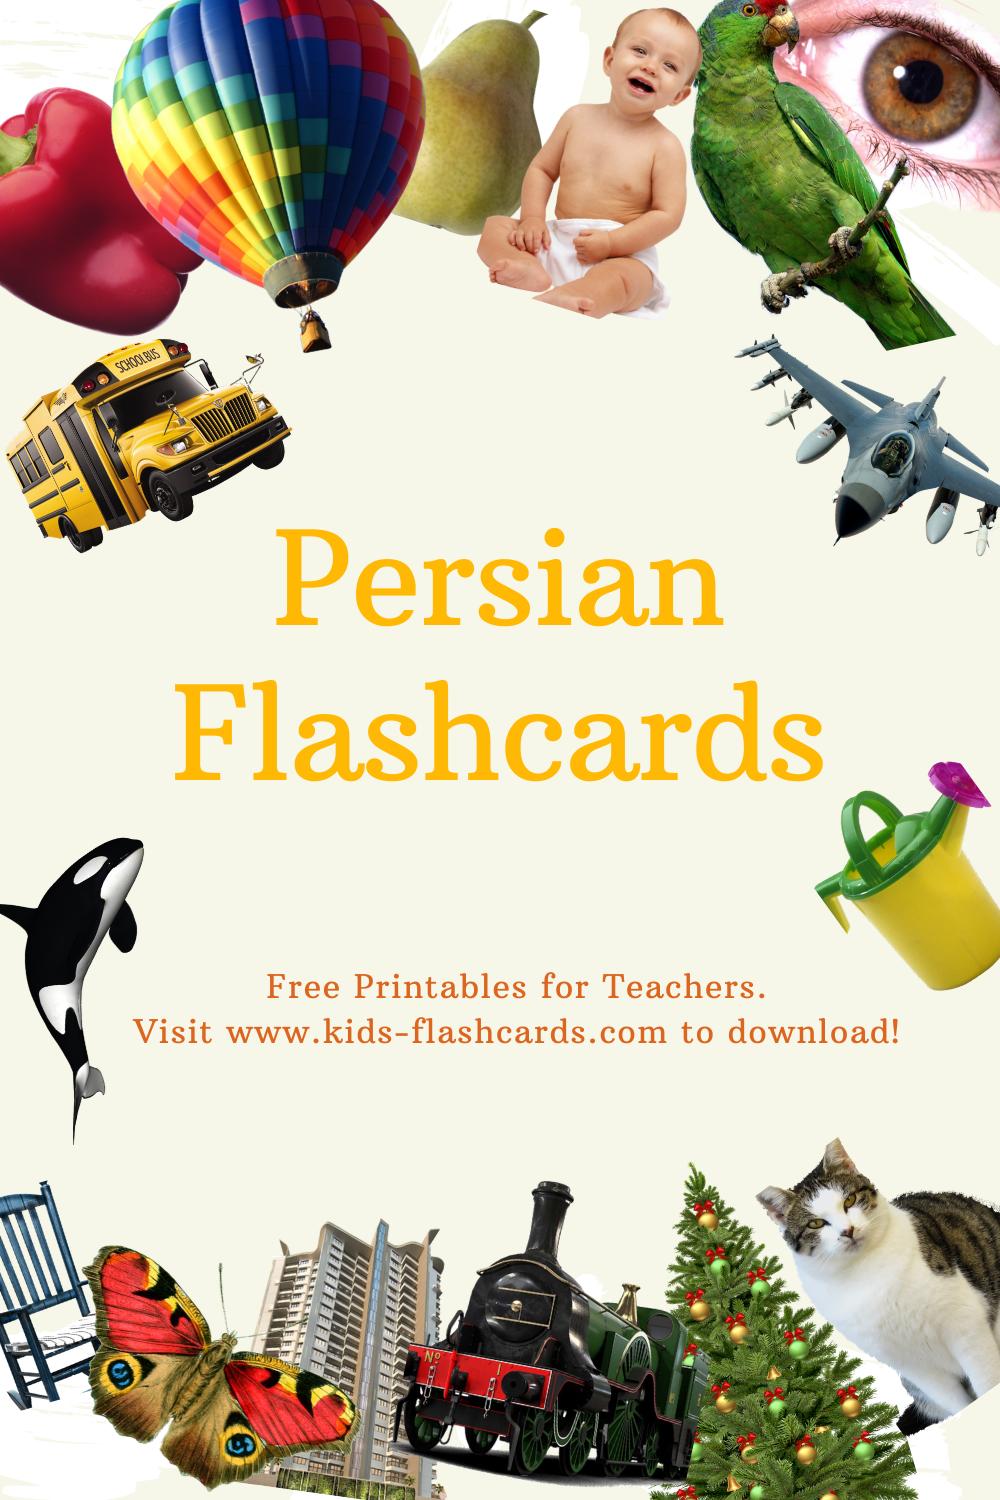 Worksheets to learn Persian language